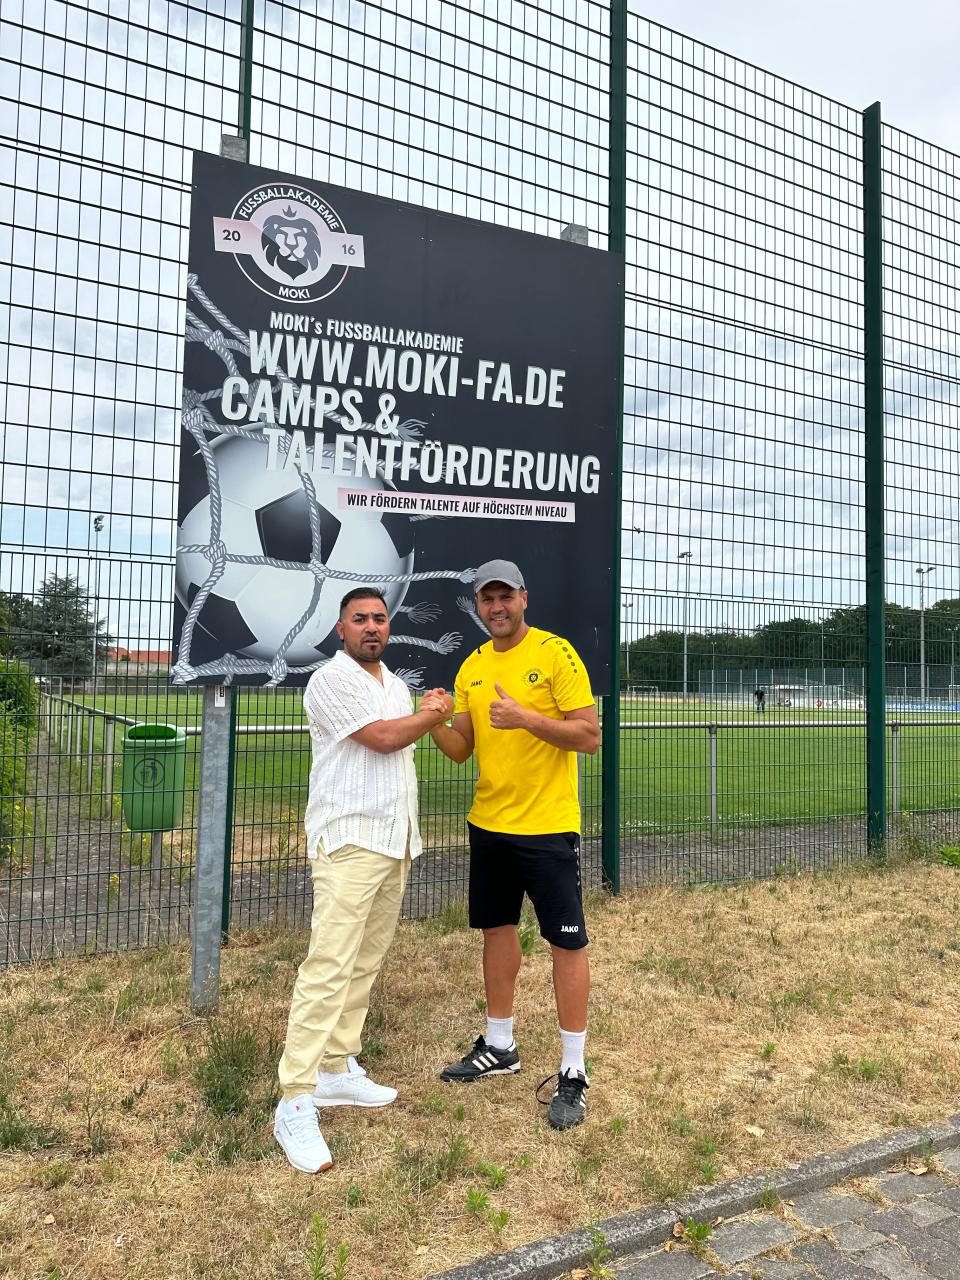 Chris Hernandez (left) and  Yousef Mokhtari (right) pose for a photo during one of the days of the Moki Fussballakademie soccer youth trial in Germany.